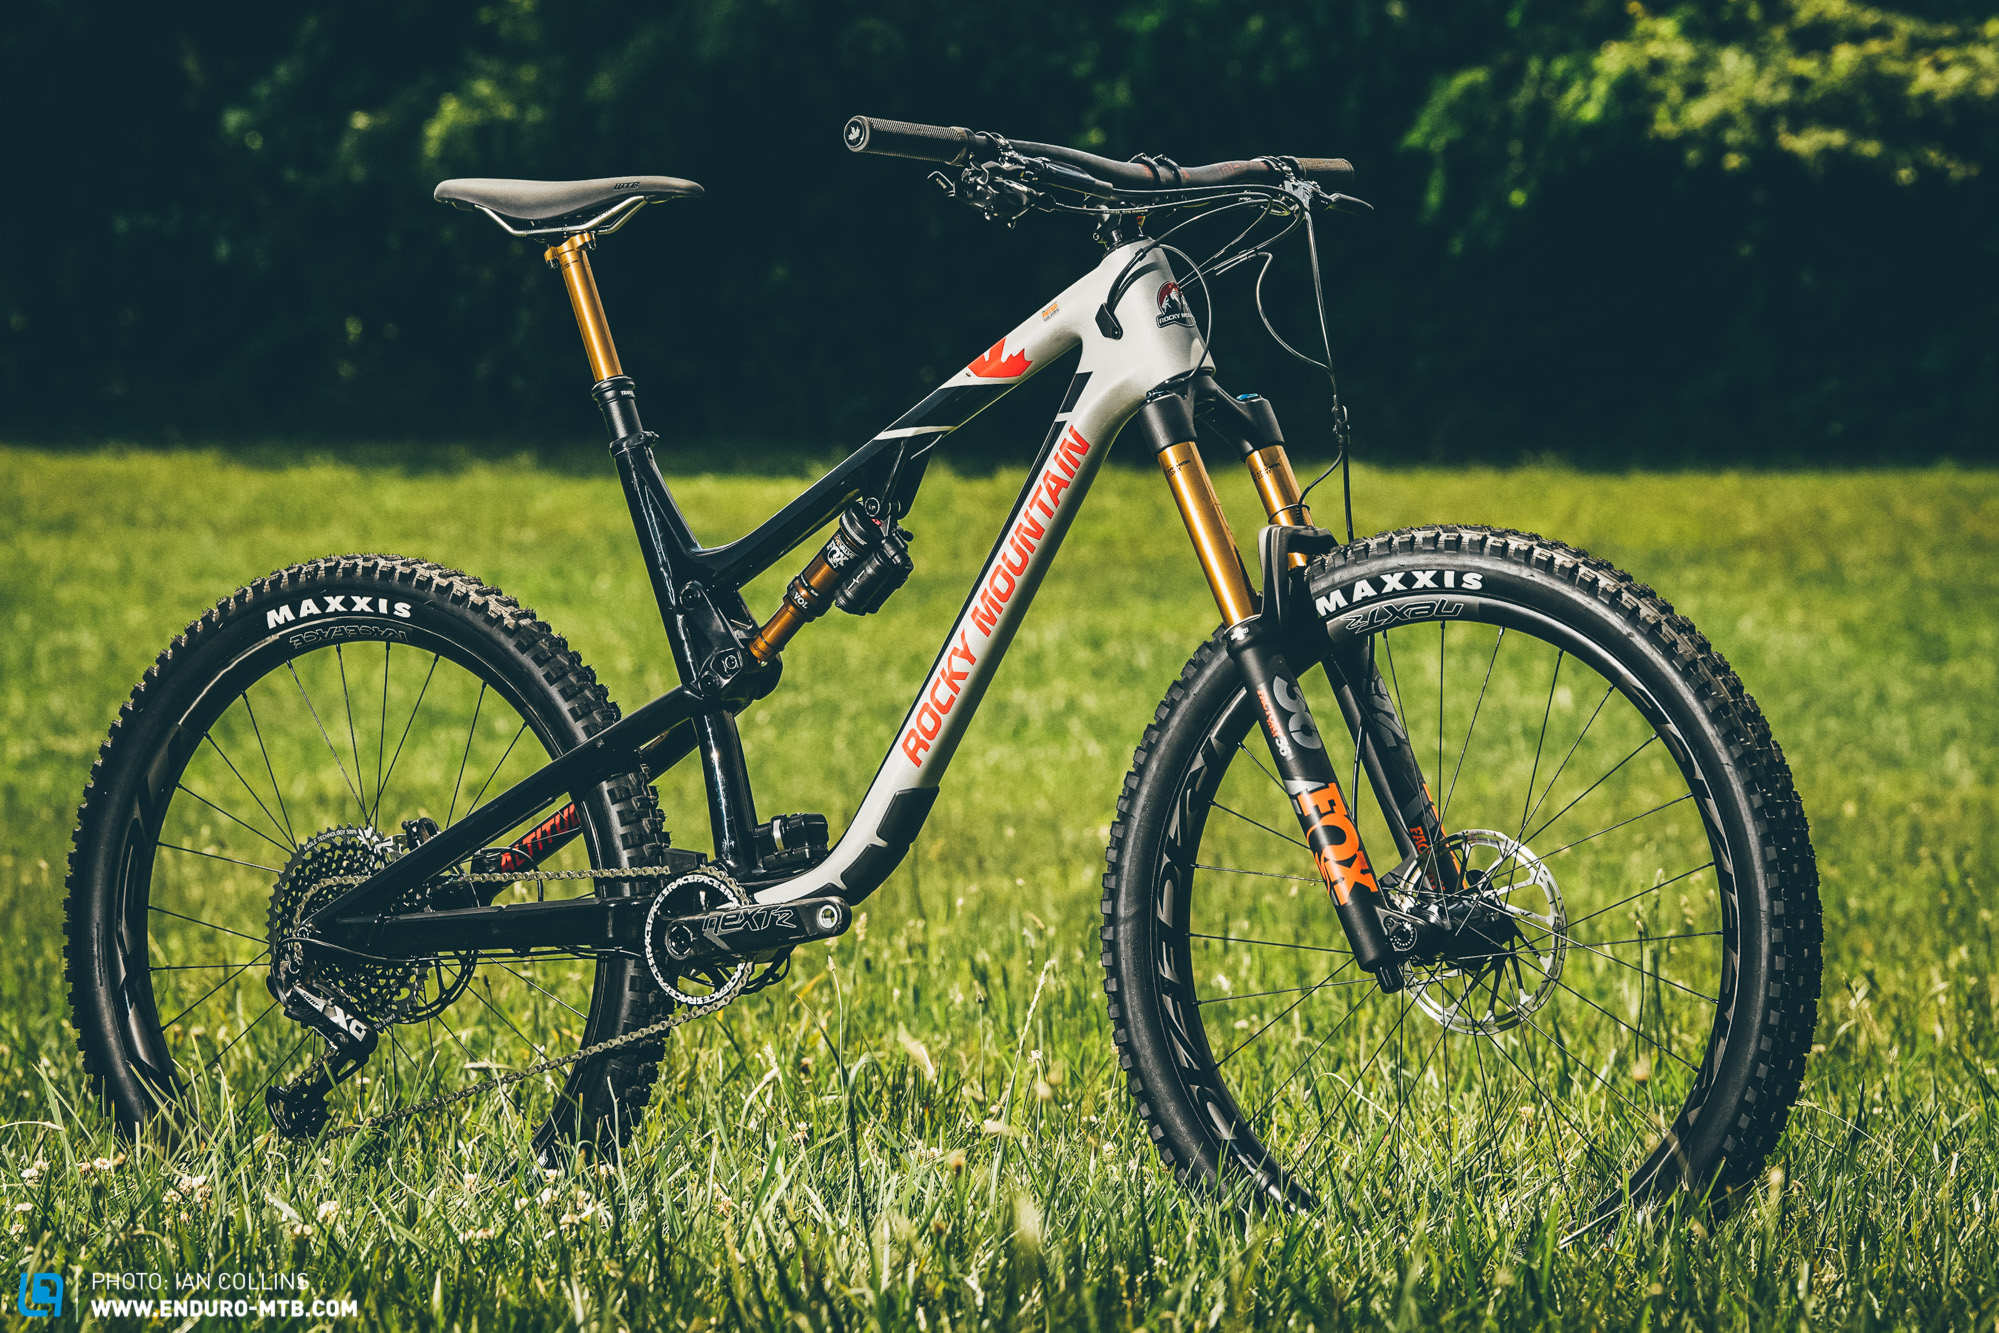 FOX Live Valve review – is this the suspension revolution?